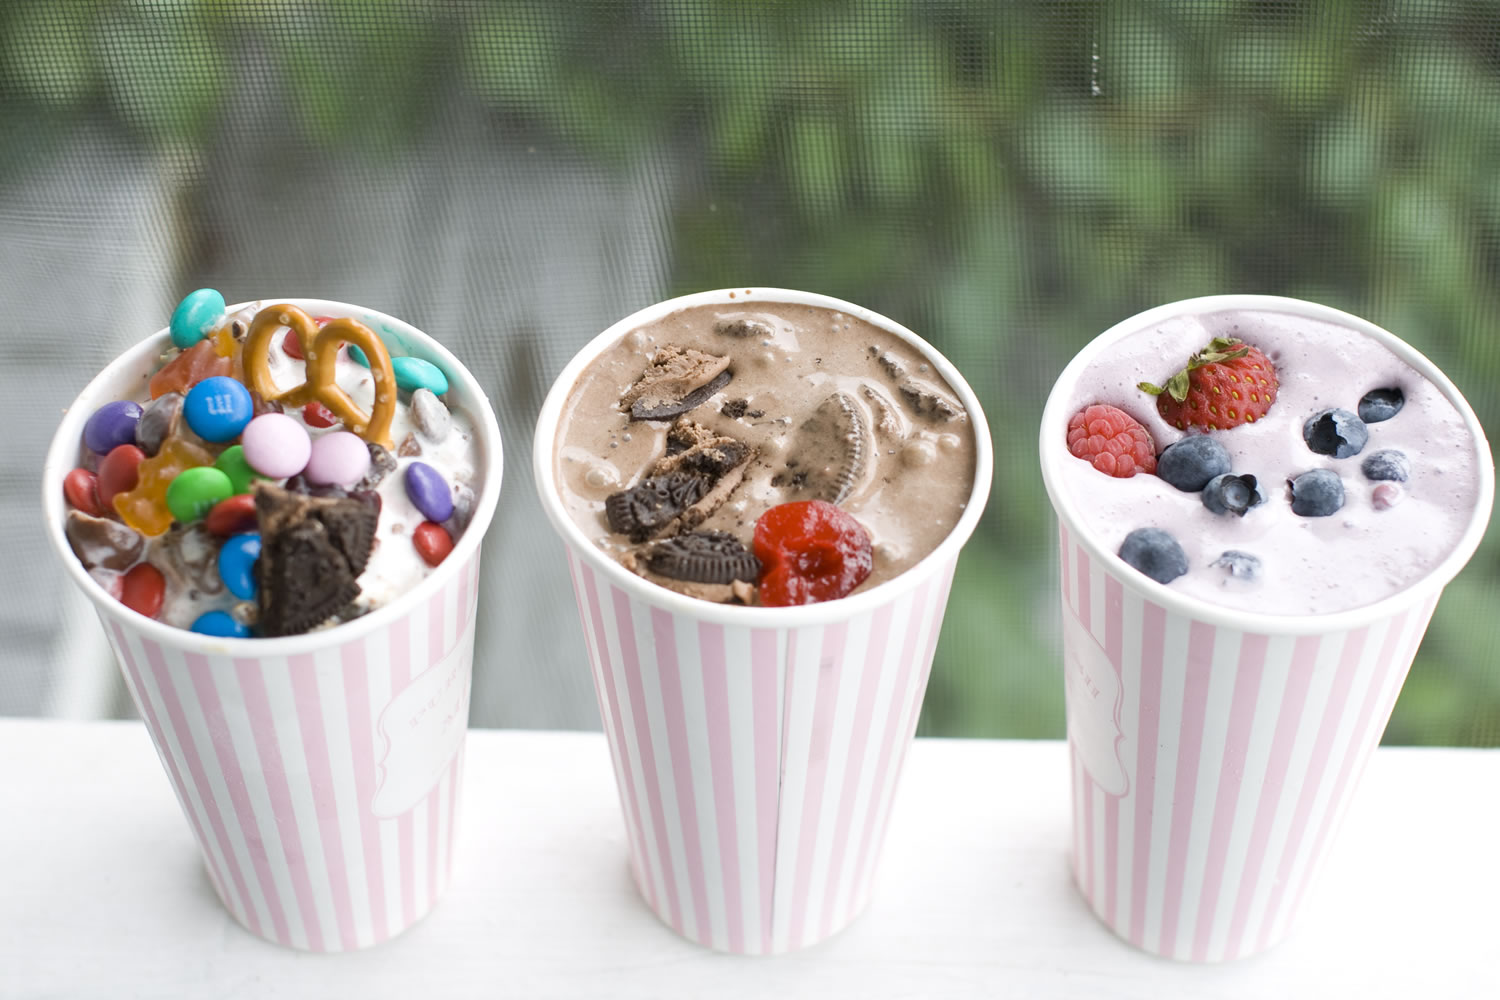 From left to right: Concession Stand, Dark Horse Cherry, Berry Basket DIY ice cream flurries